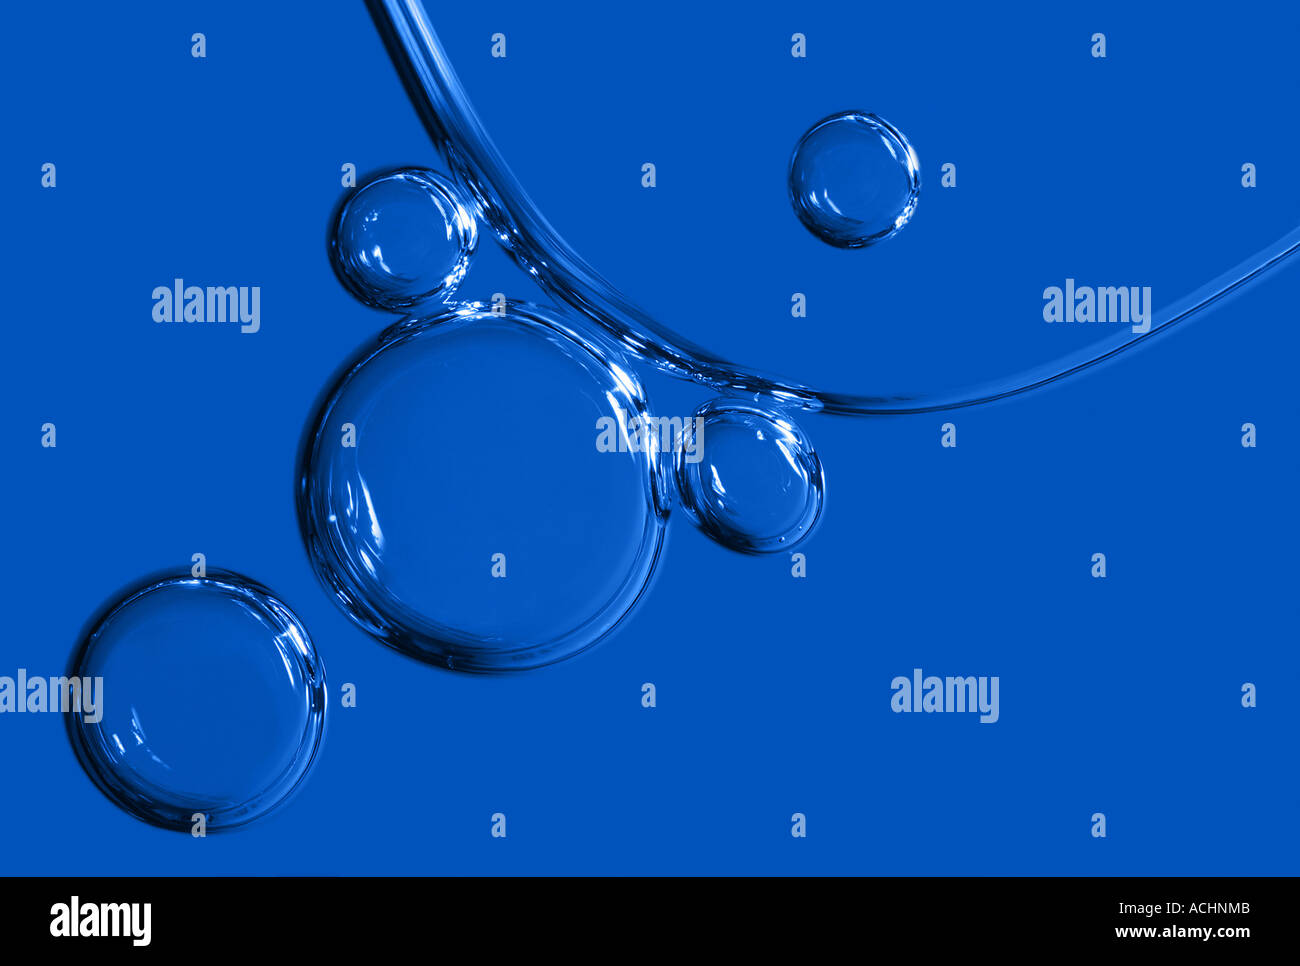 Air bubbles in blue oil Stock Photo